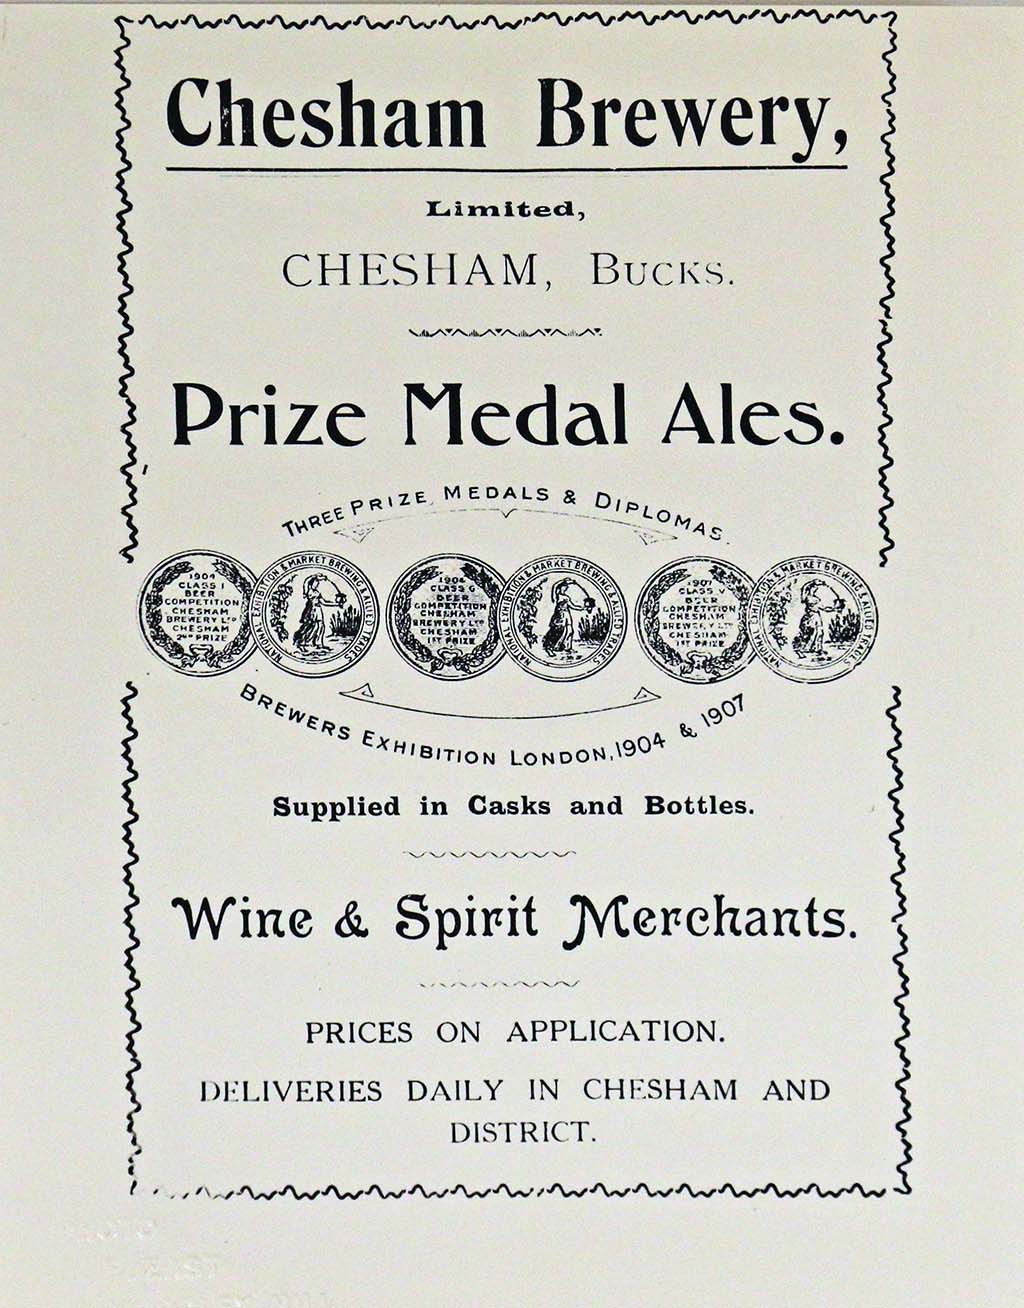 Chesham Brewery prize medal ales